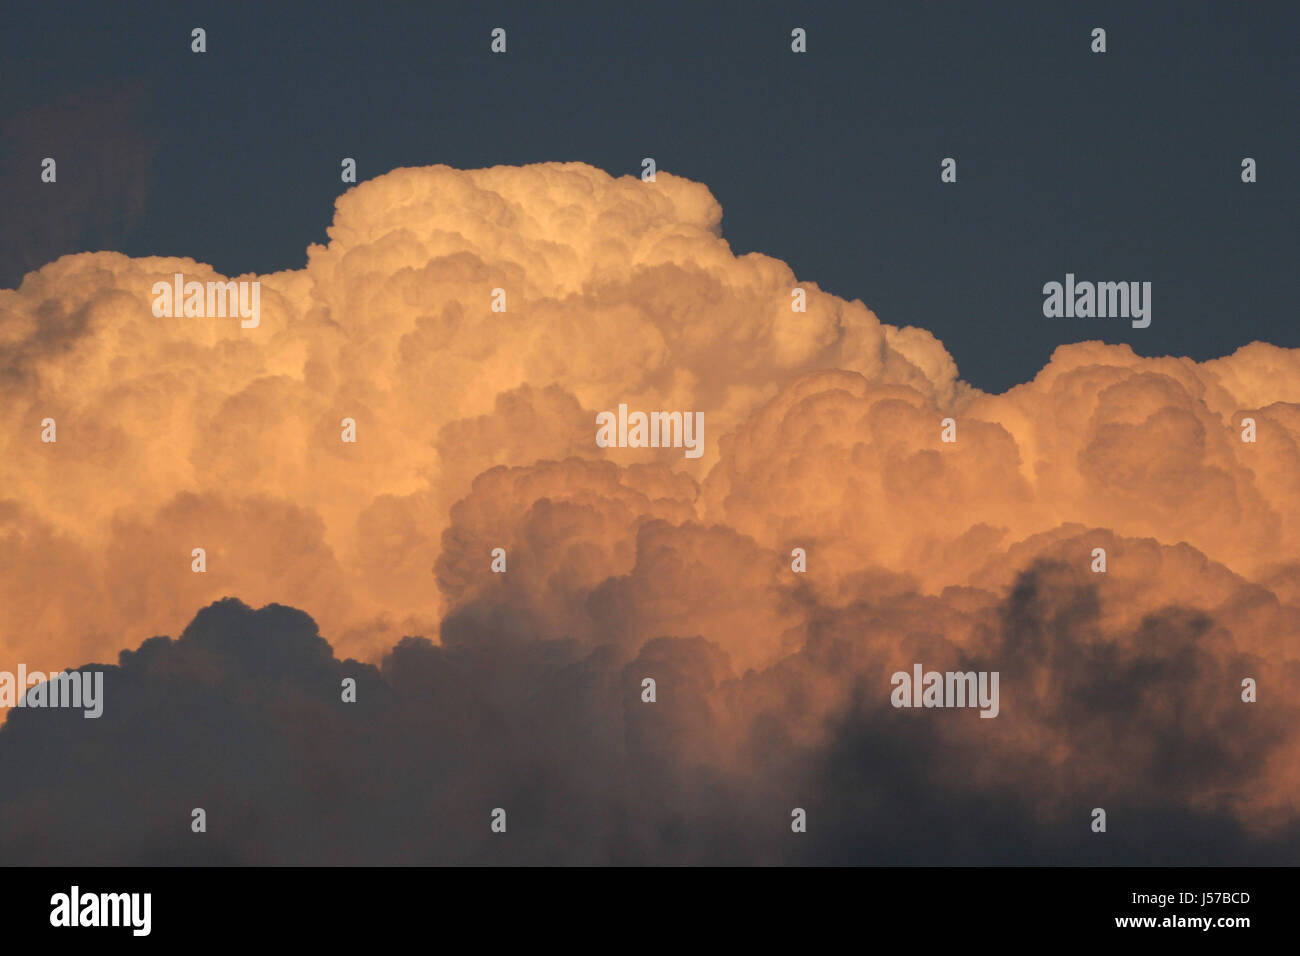 big large enormous extreme powerful imposing immense relevant cloud Stock Photo